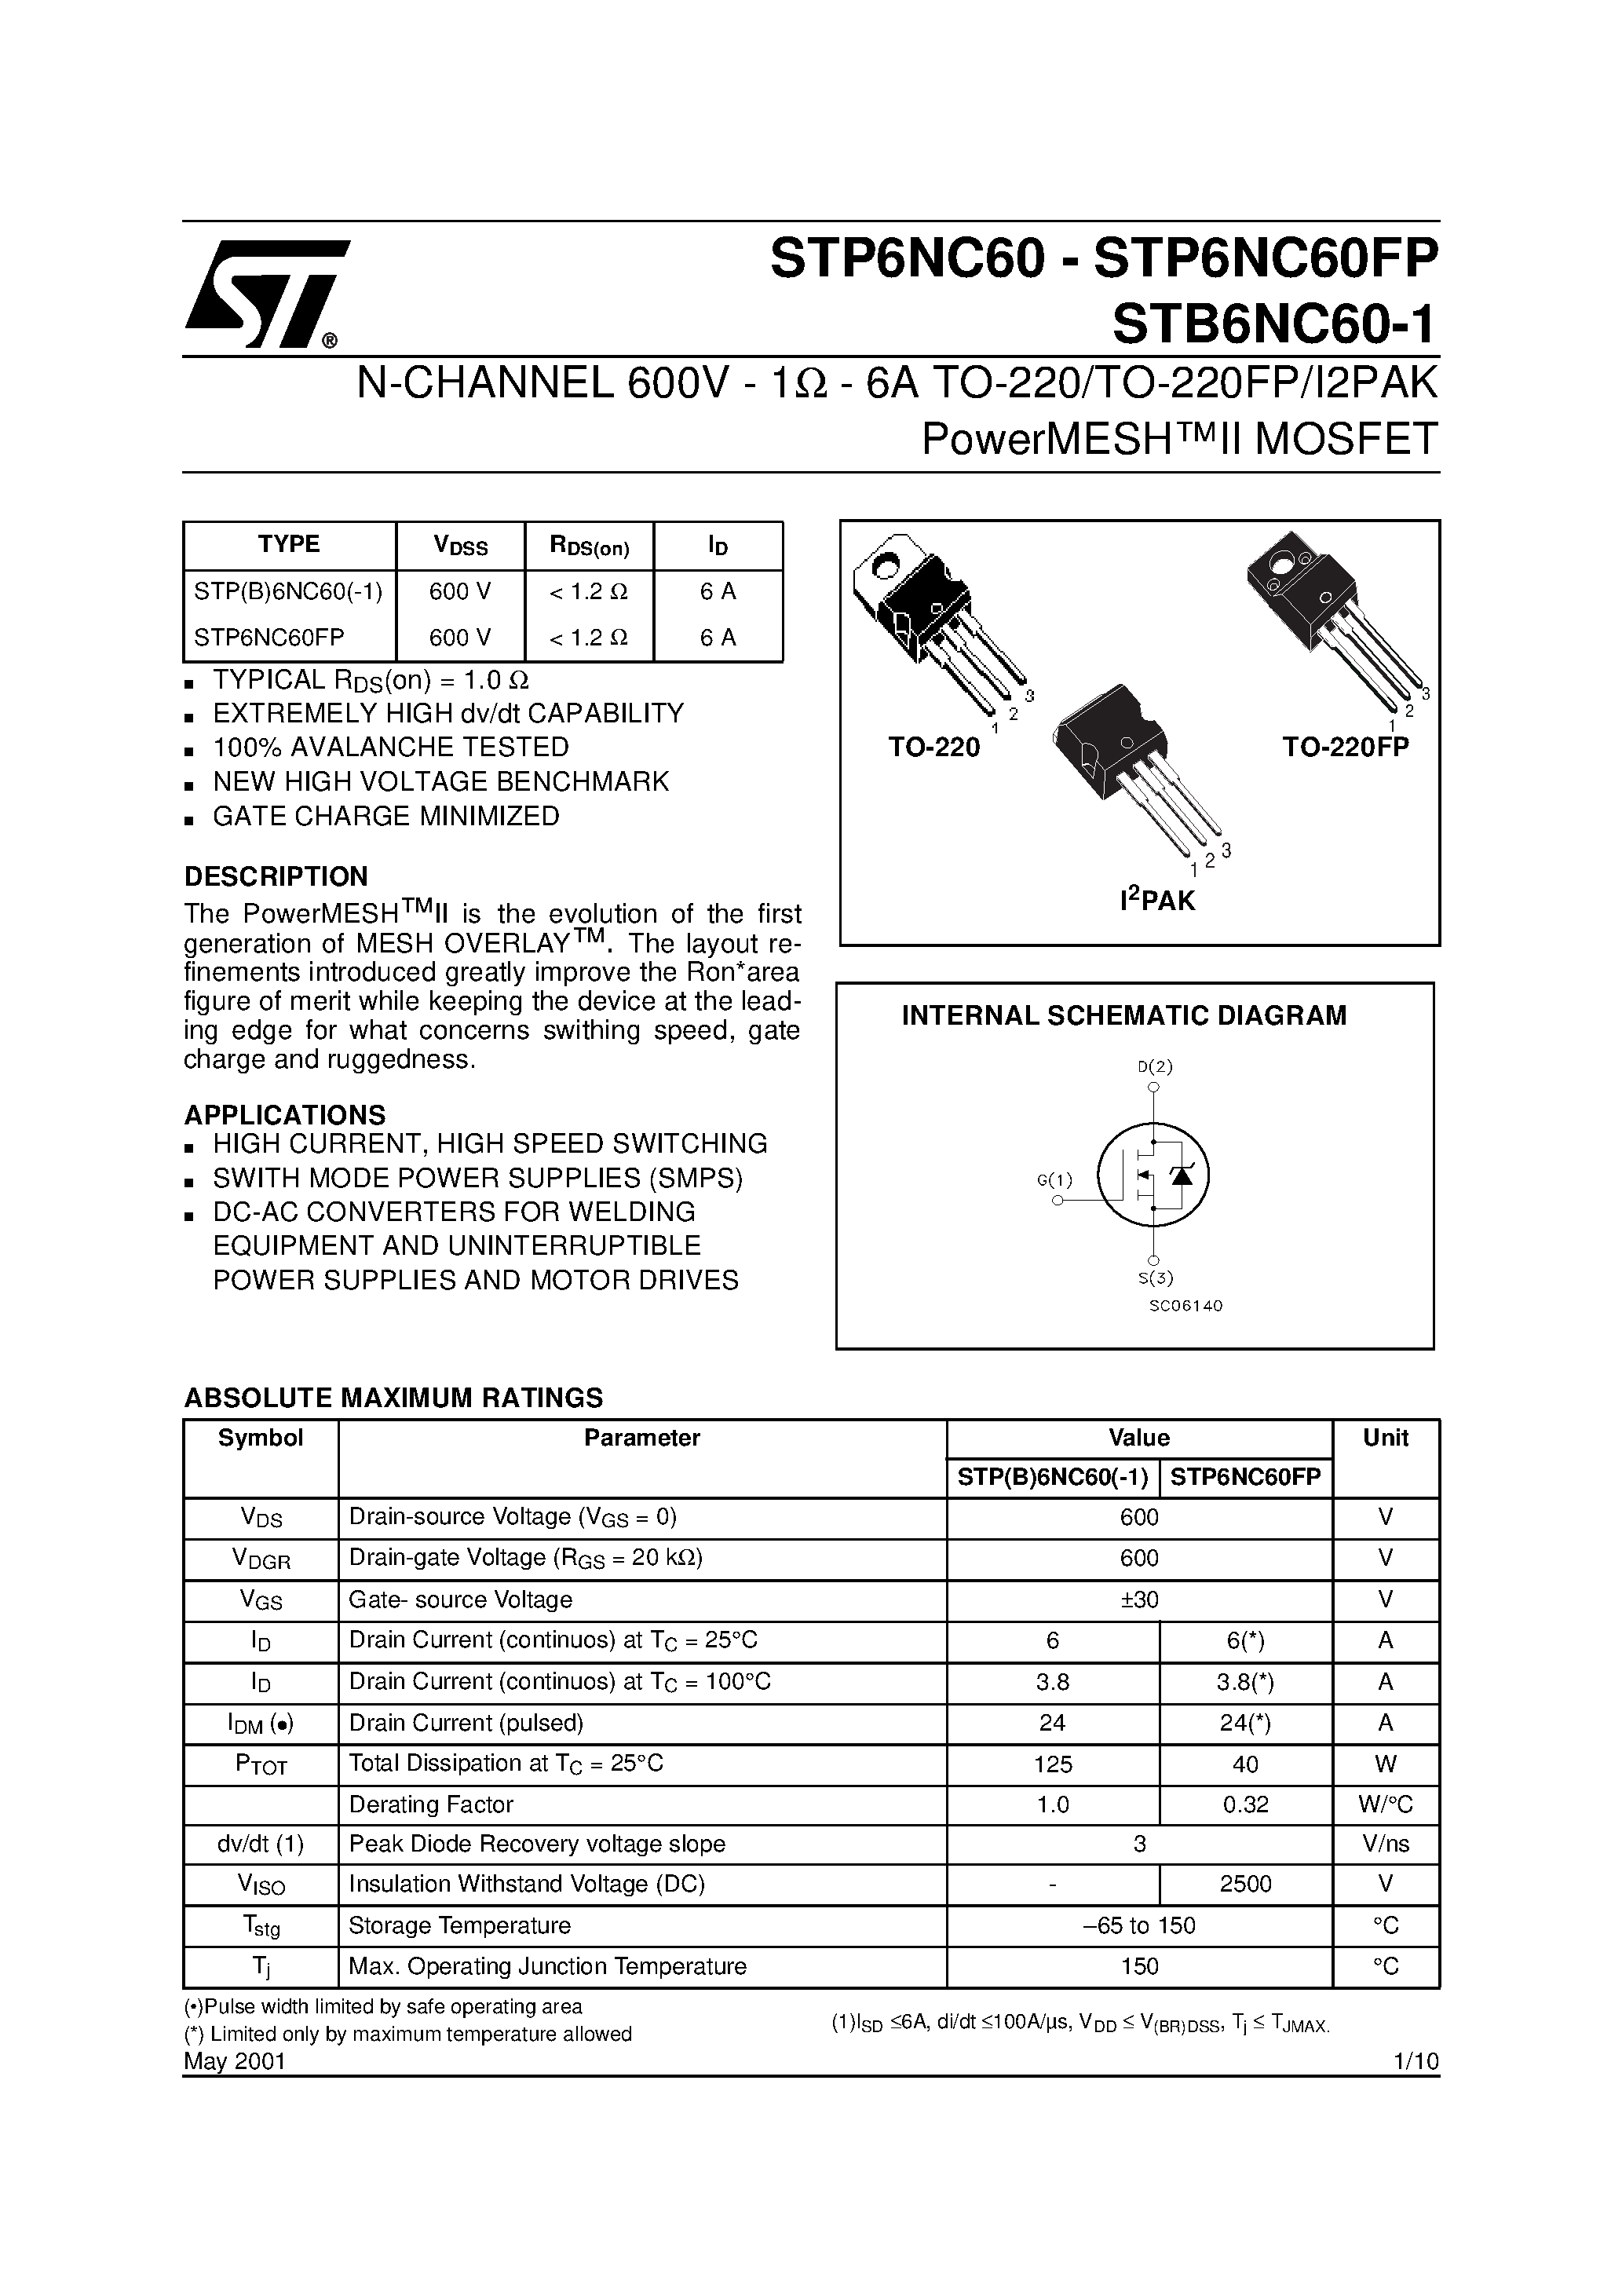 Даташит STP6NC60 - N-CHANNEL Power MOSFET страница 1